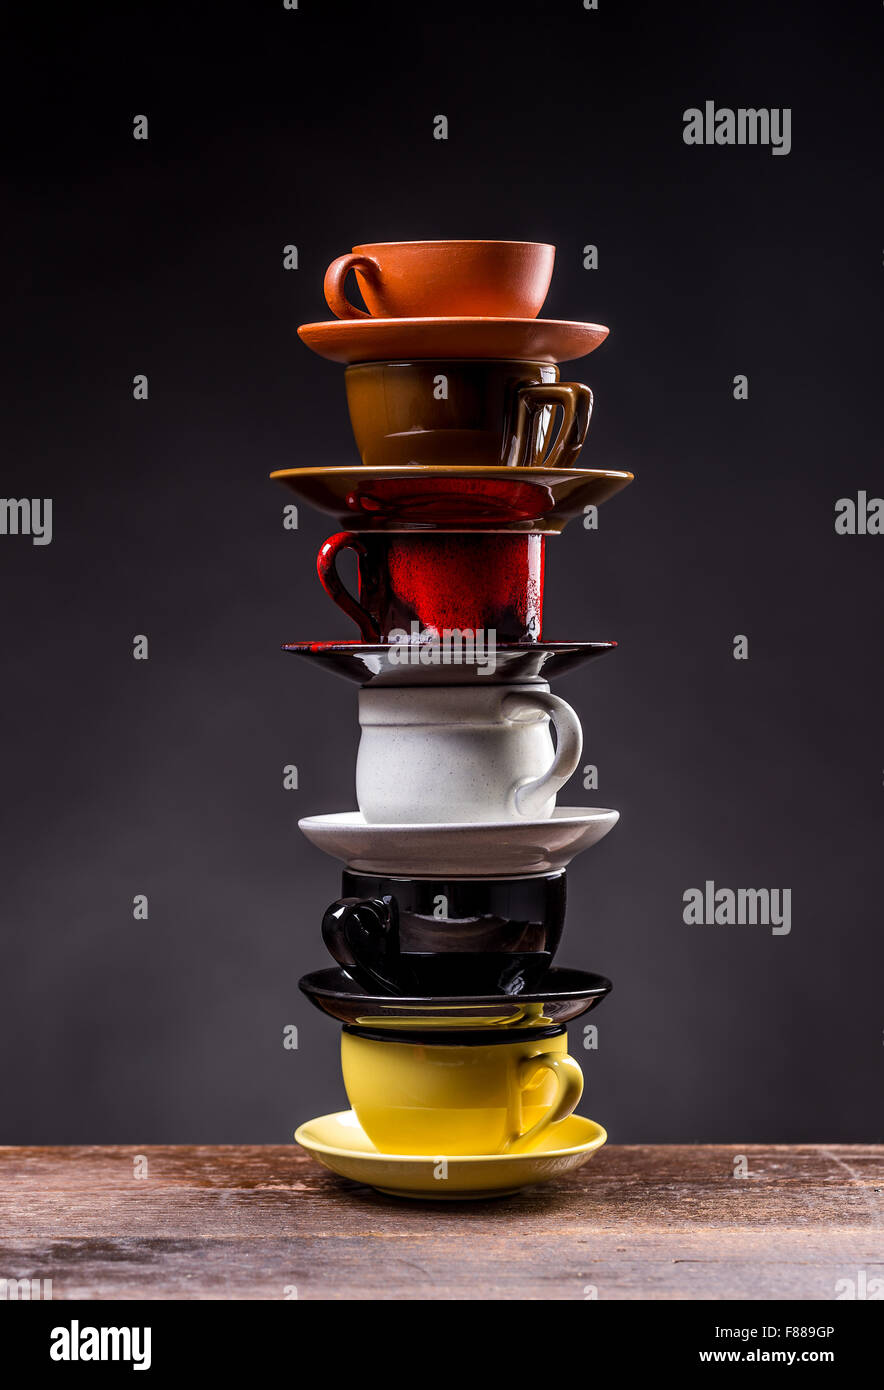 High stack of coffee cup tableware Stock Photo